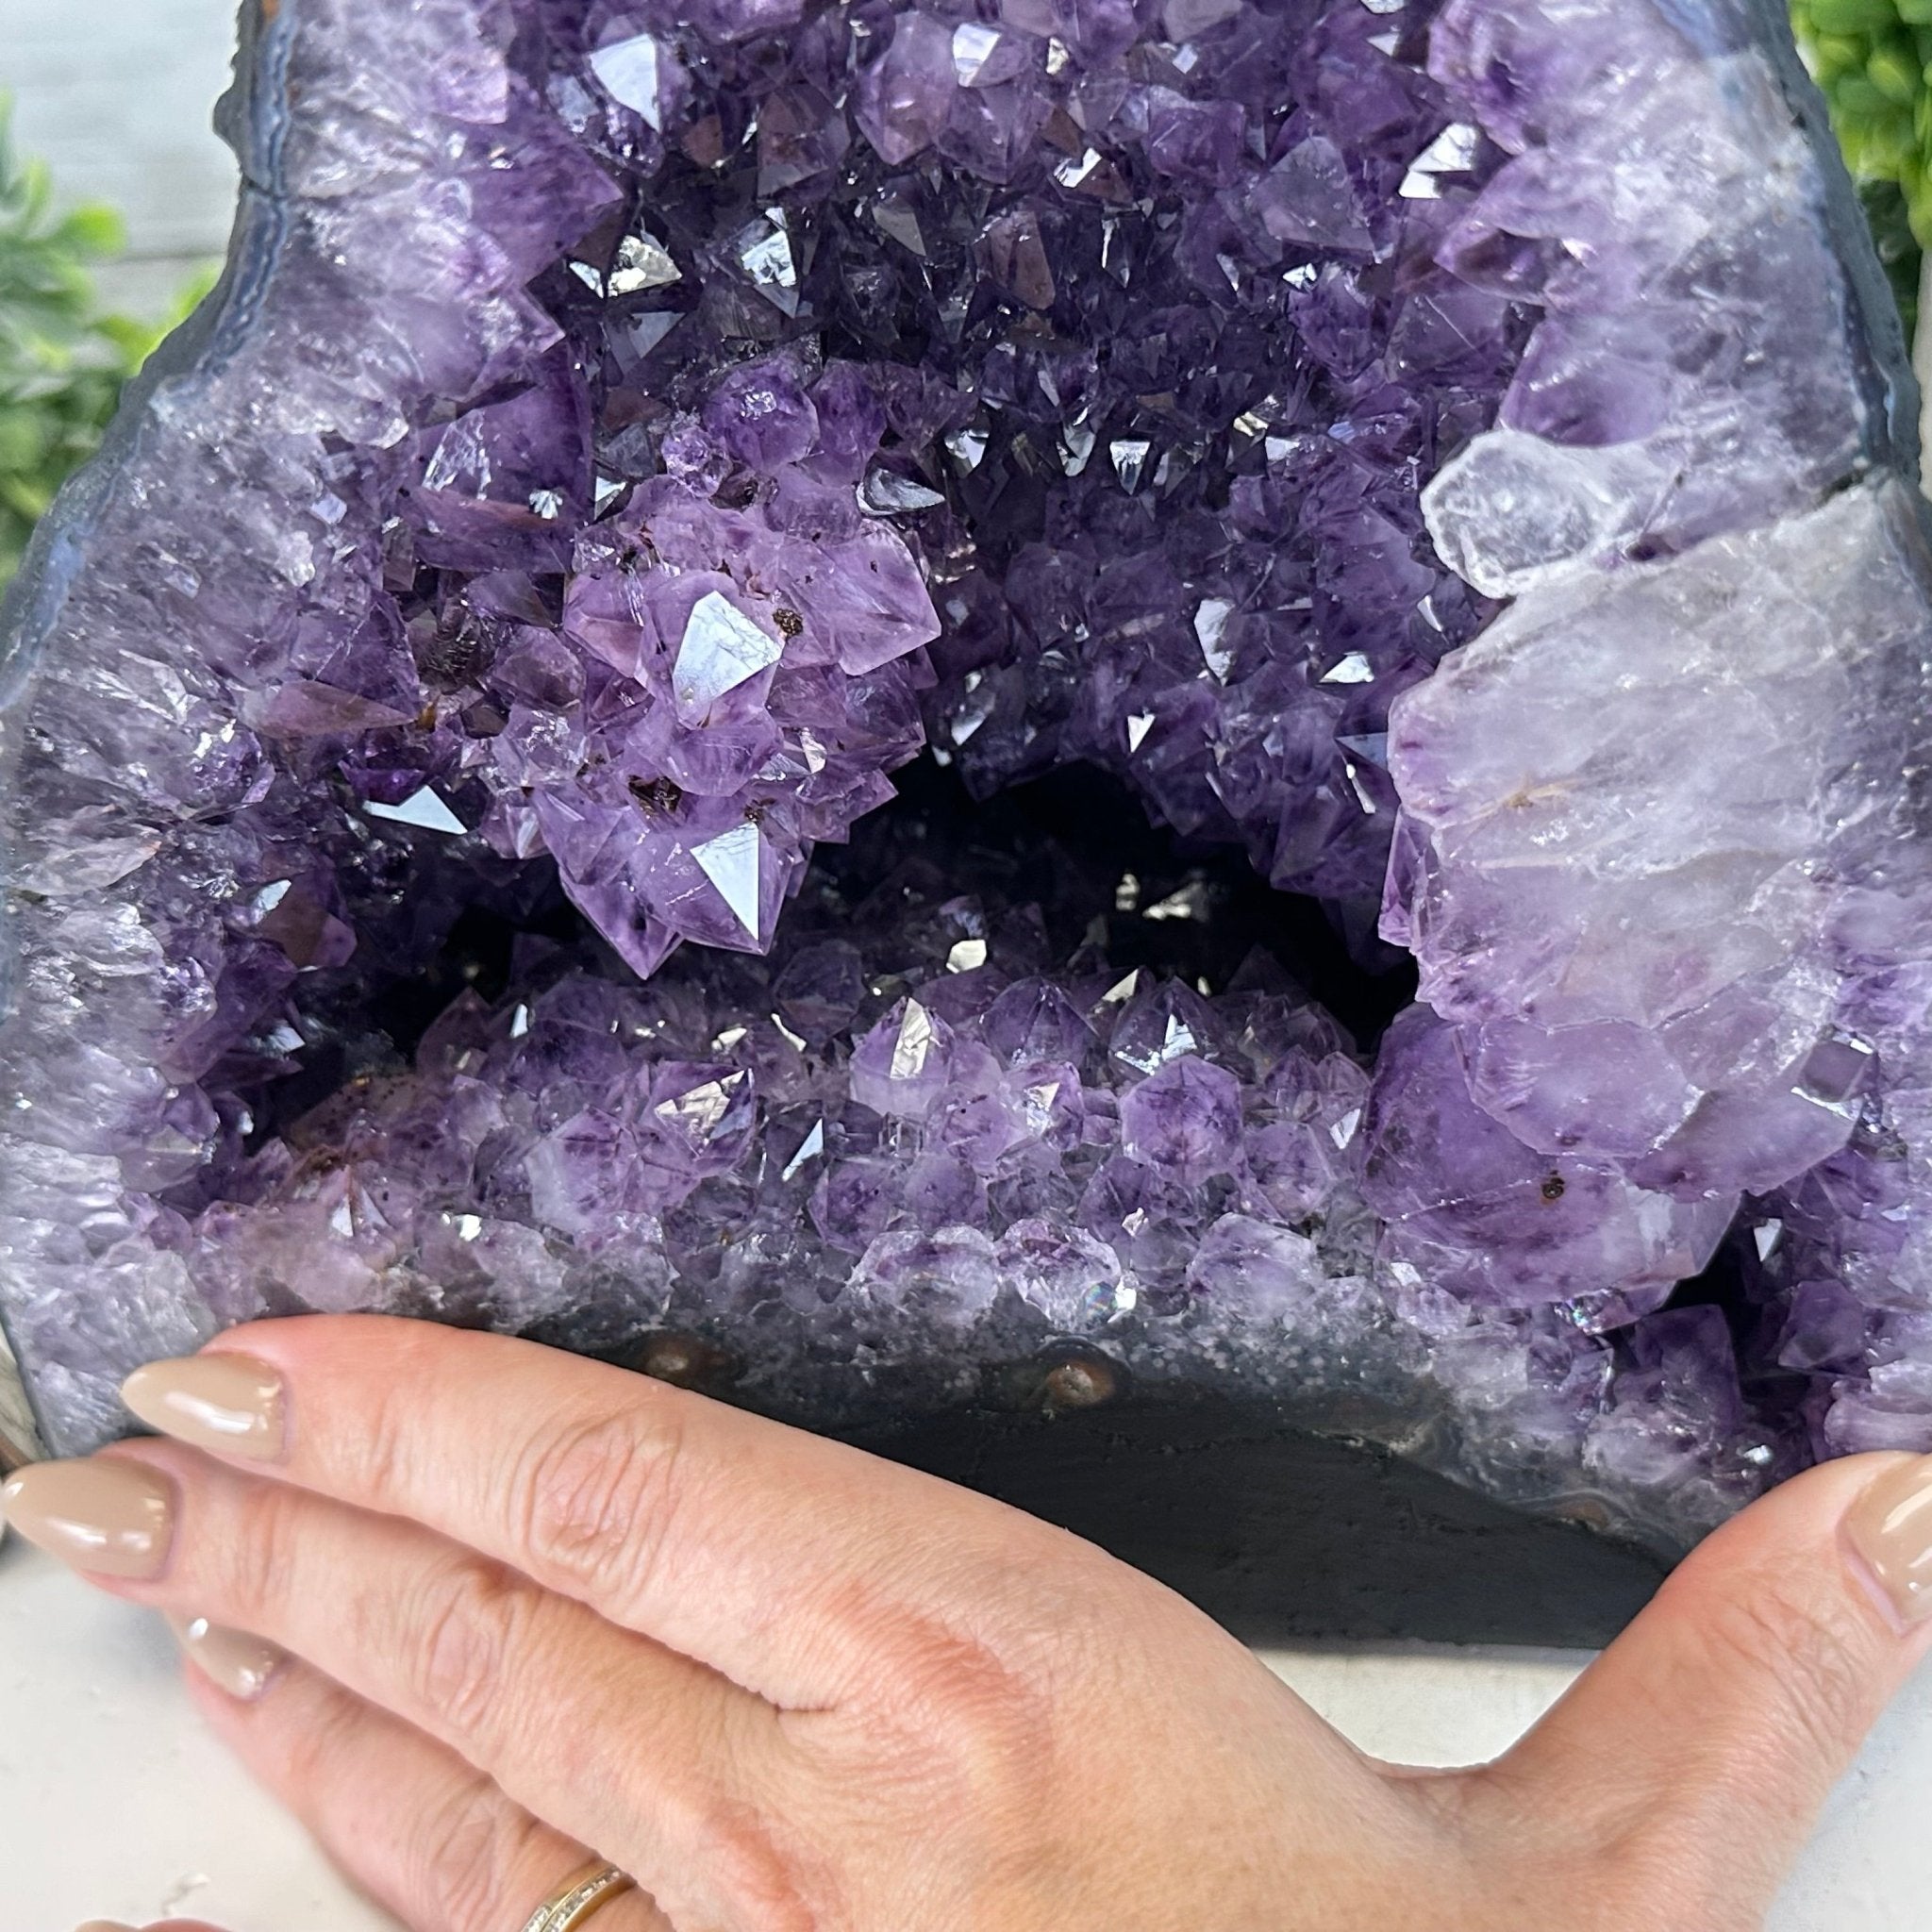 Quality Brazilian Amethyst Cathedral, 13.5 lbs & 9.4" Tall, #5601 - 1364 - Brazil GemsBrazil GemsQuality Brazilian Amethyst Cathedral, 13.5 lbs & 9.4" Tall, #5601 - 1364Cathedrals5601 - 1364